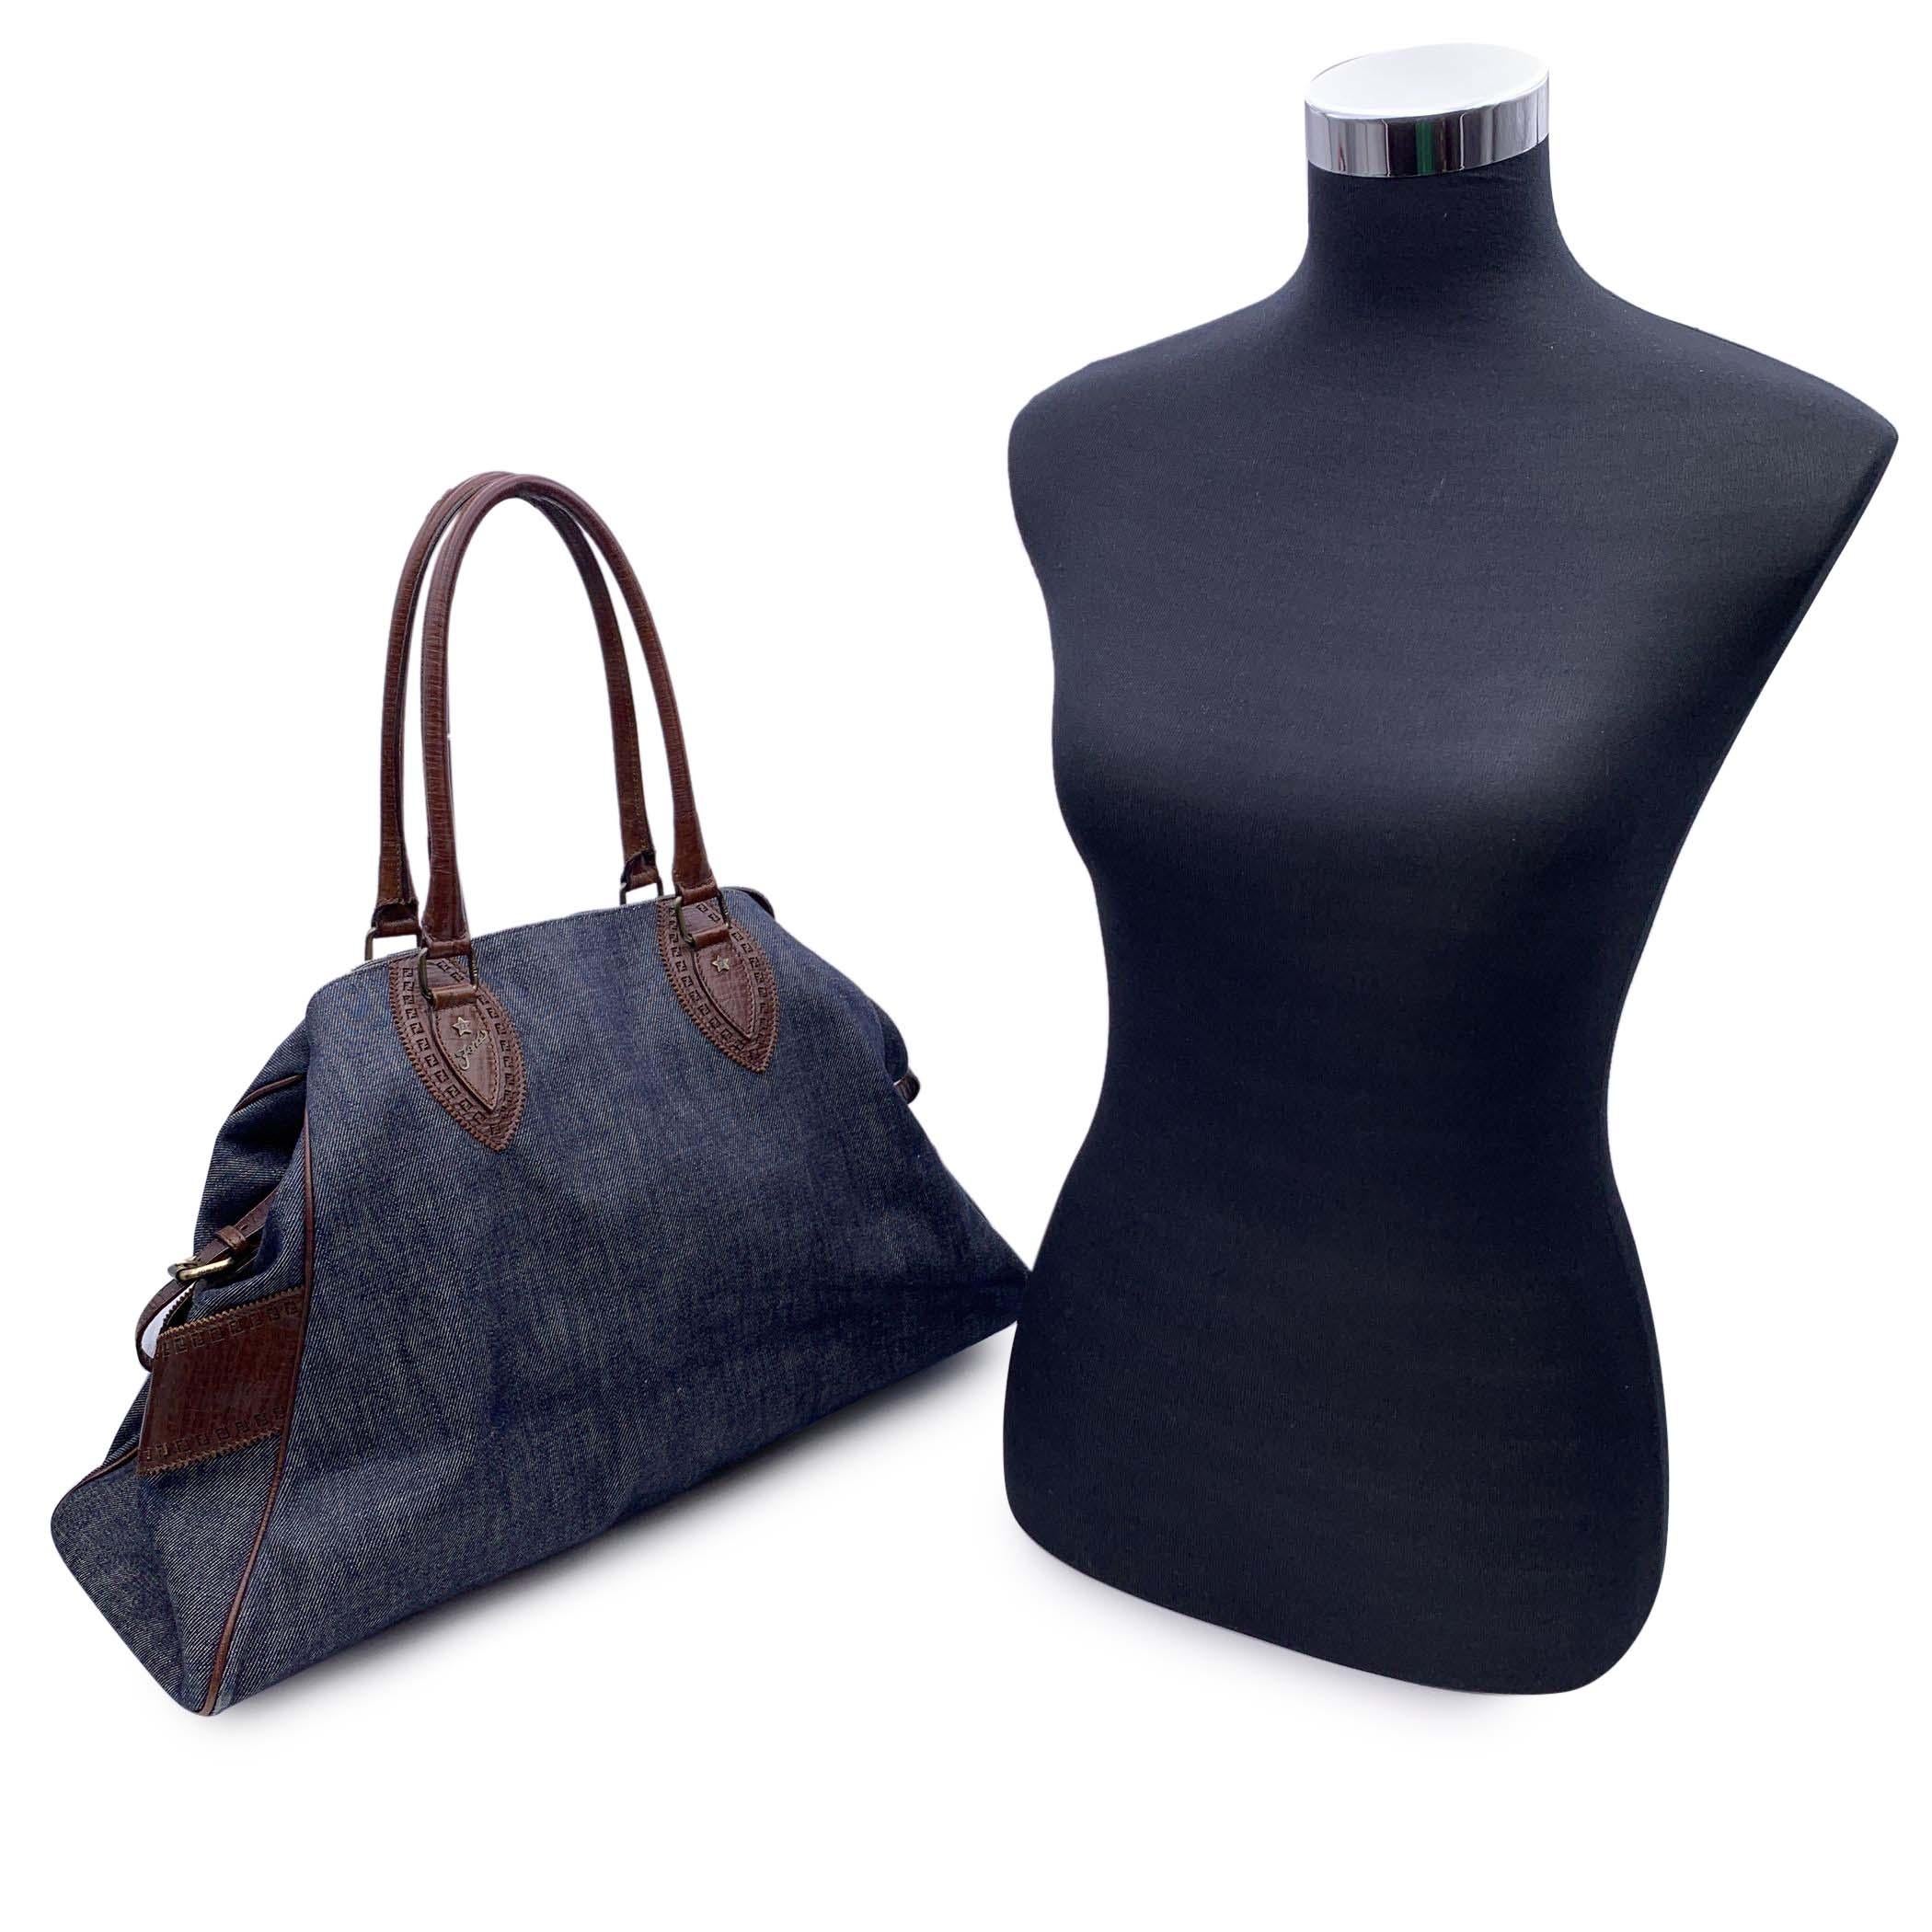 Stylish 'Bag Du Jour' by Fendi. Crafted from blue denim with brown leather trim and handles.It features two side pockets with buckle closure. Rolled leather handles, double button closure on top + security clasp closure. FENDI cutout monogram on